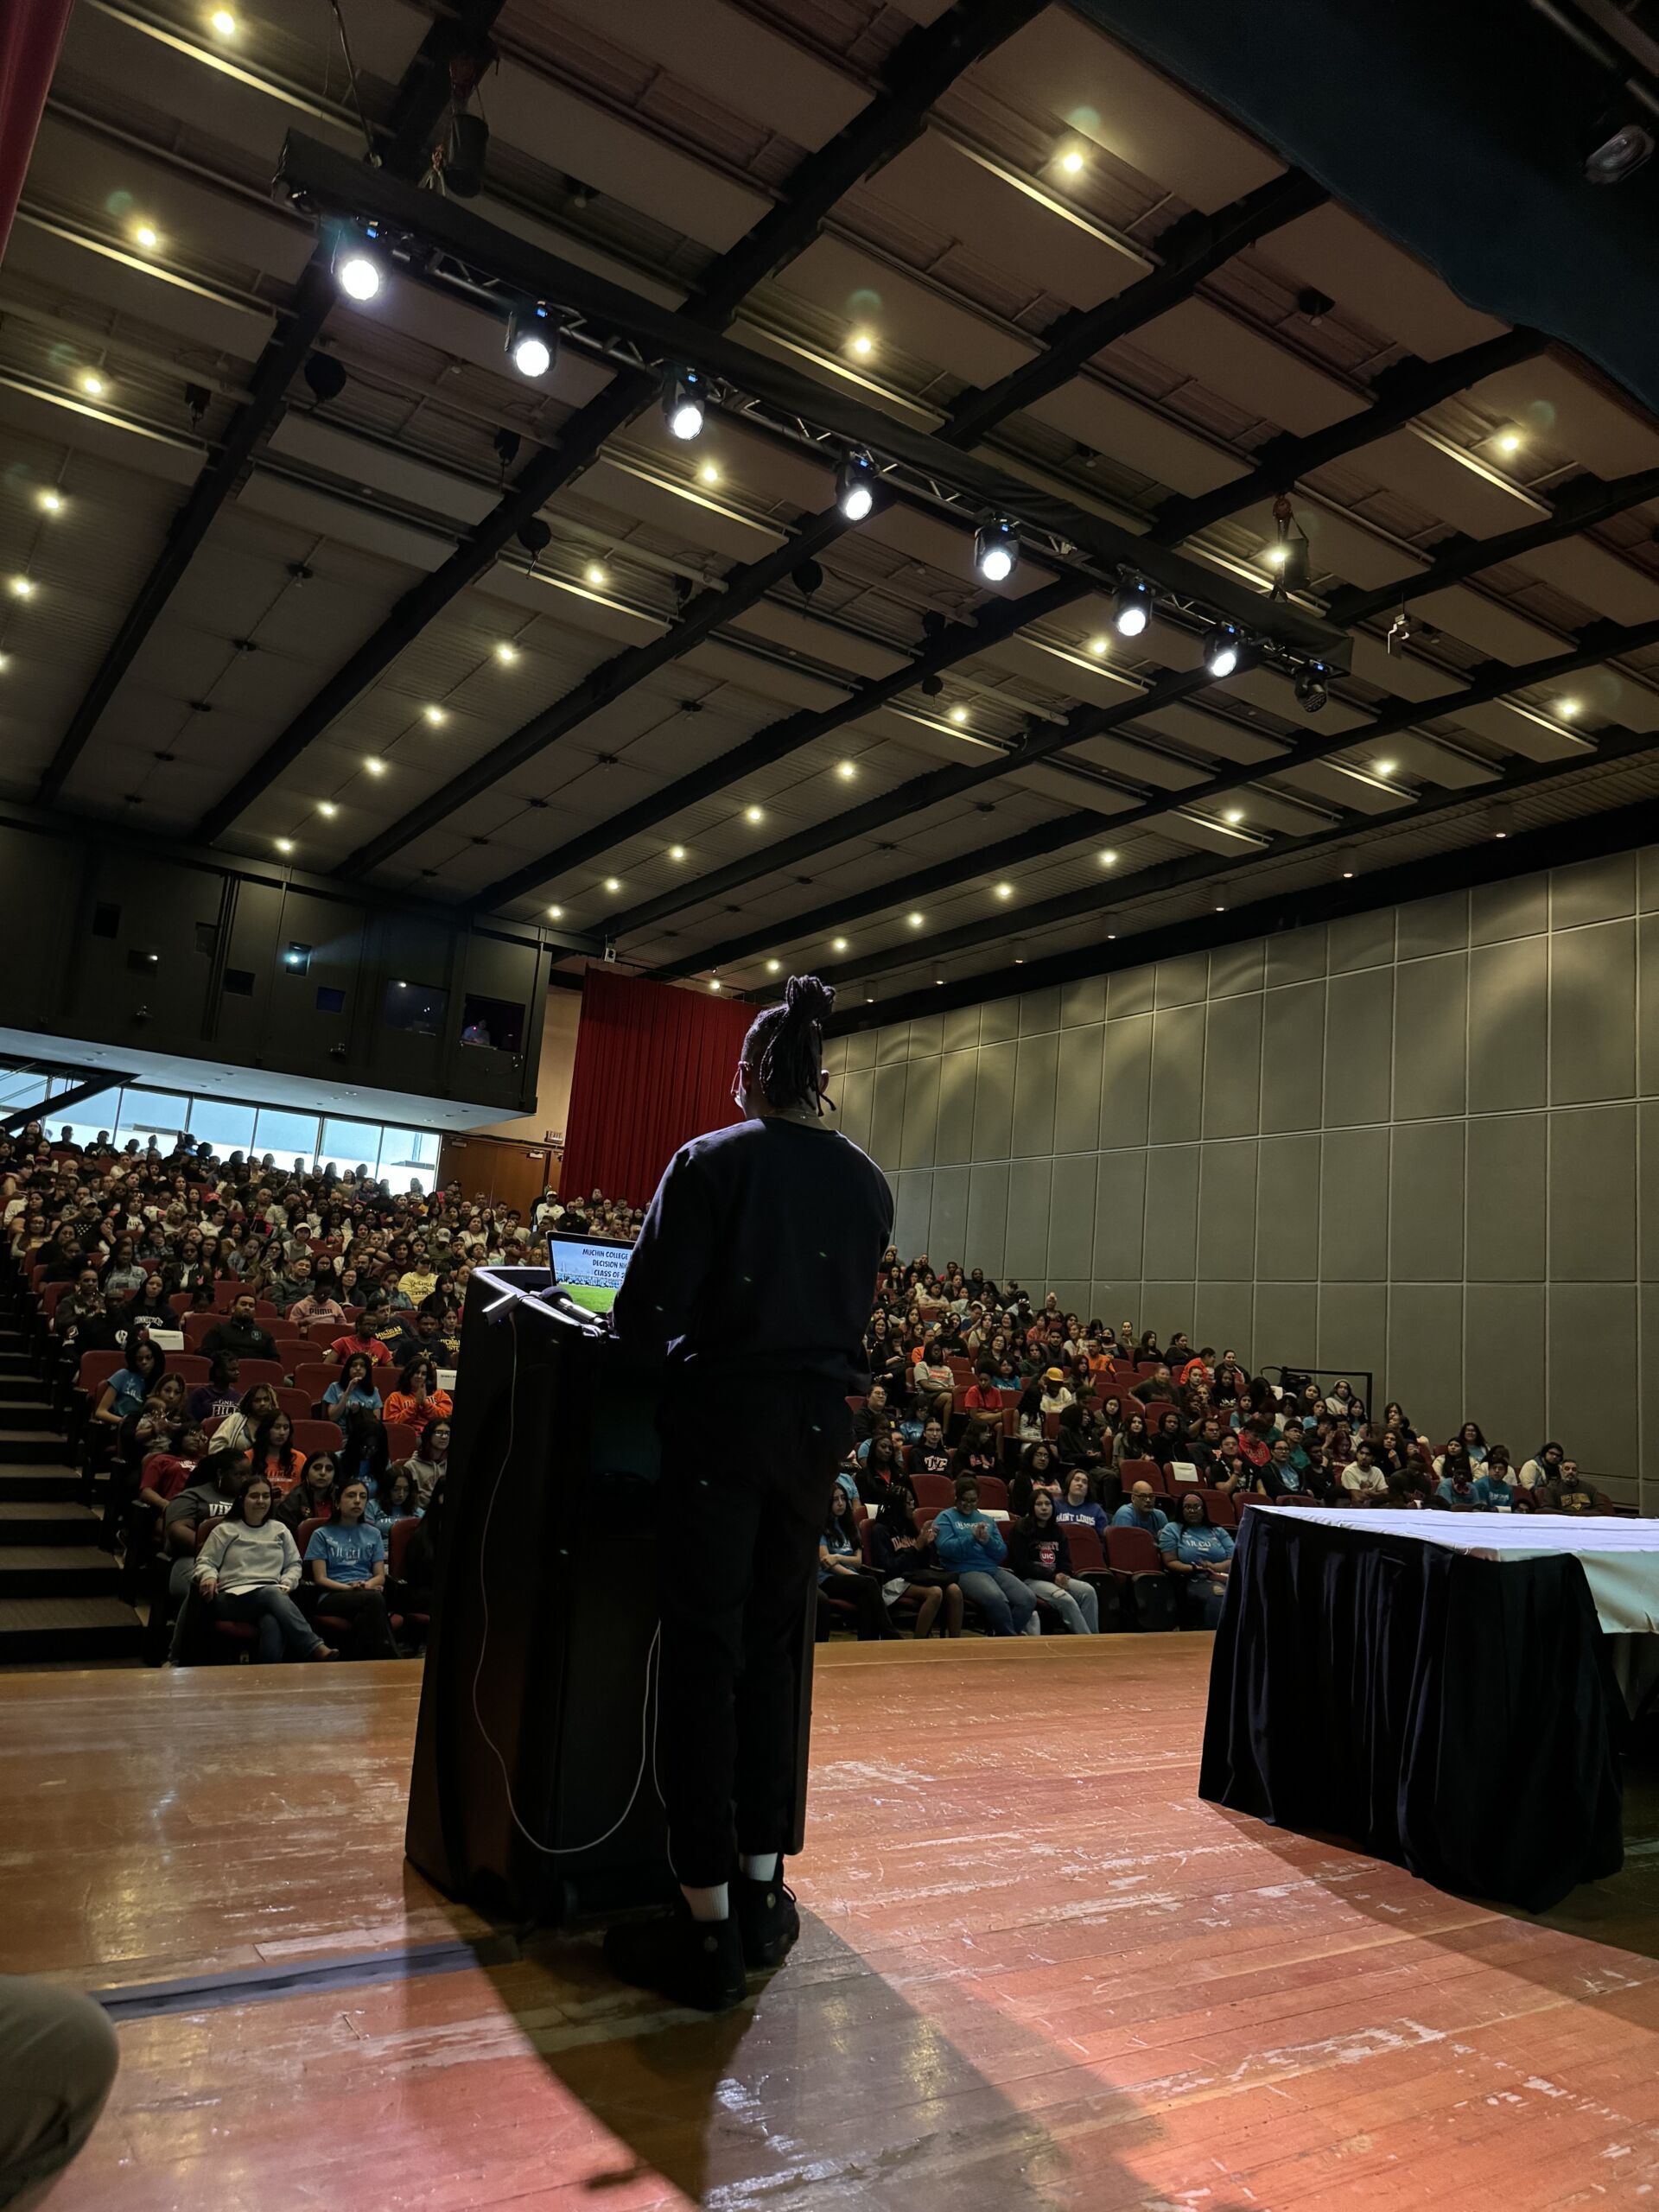 Emmanuel Jackson, a college counselor at Muchin College Prep, stands in front of a podium on a stage. You can see the crowd of students in front of him in a large auditorium.